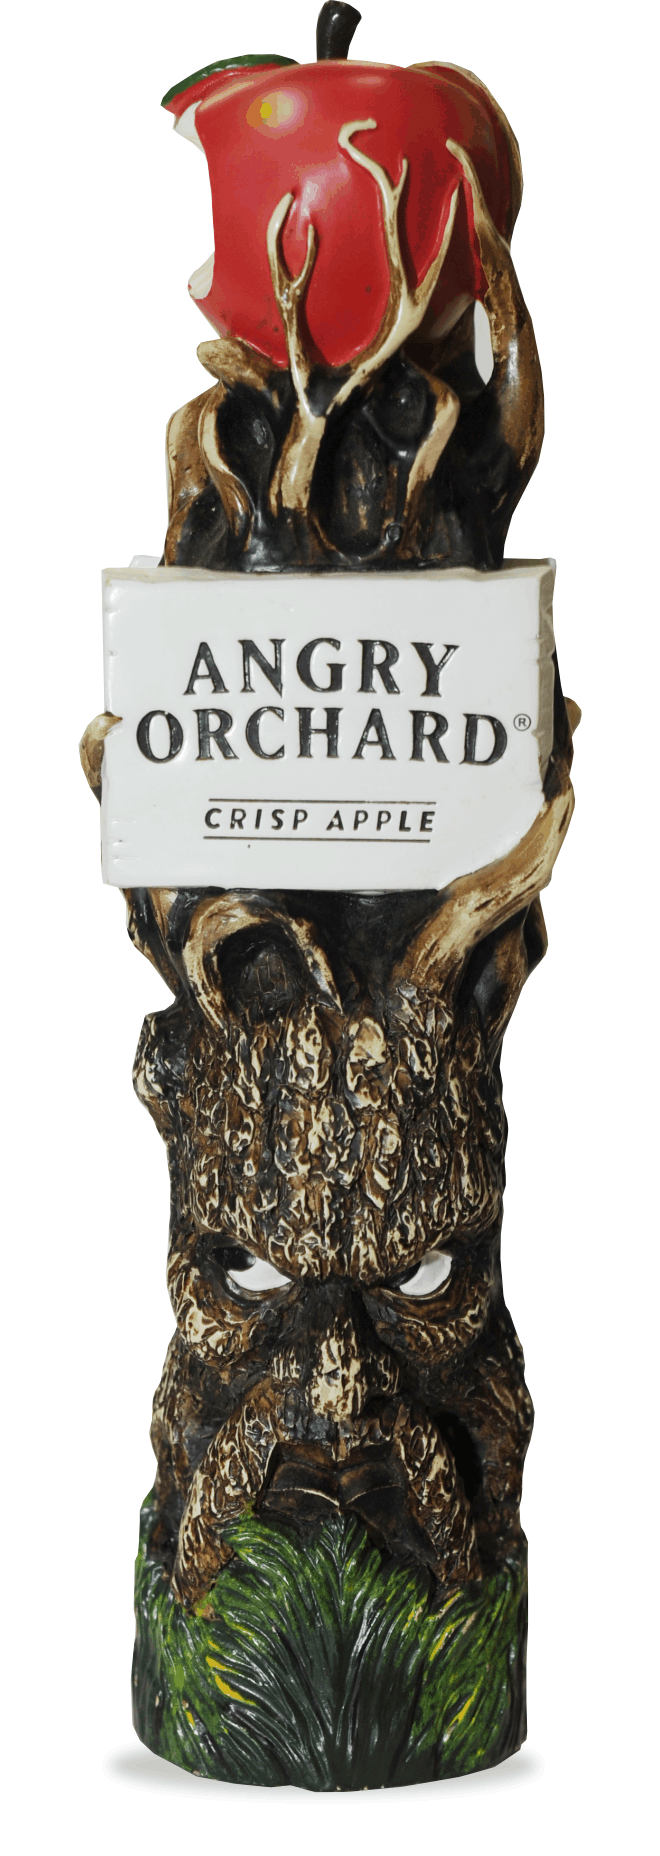 Angry Orchard Crisp Apple has a beverage tapper!